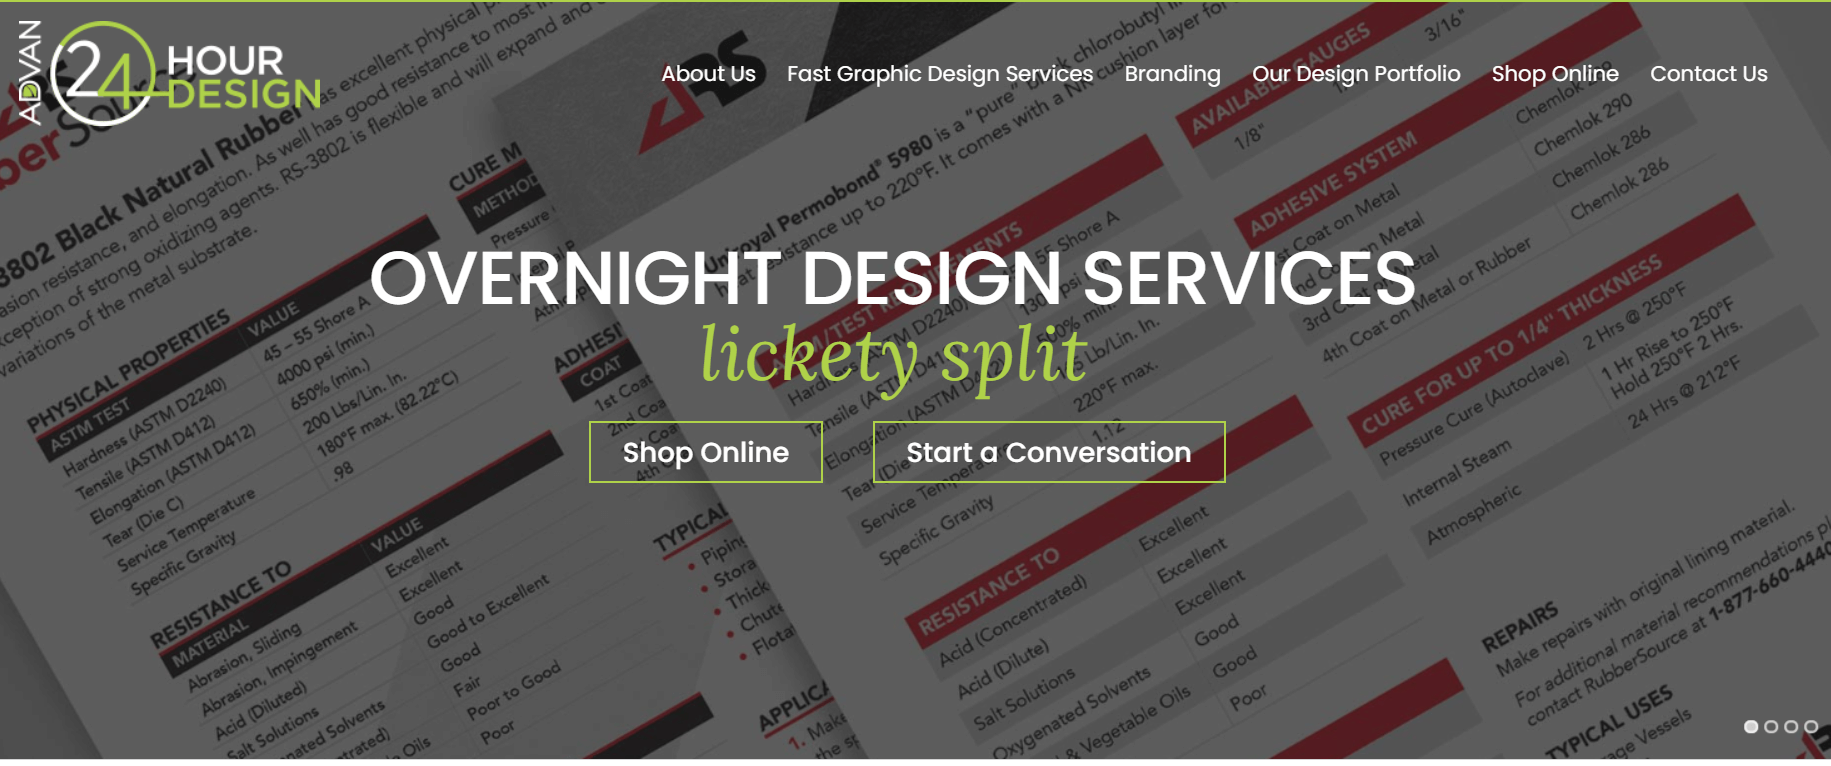 24-hour design homepage with text that reads "Overnight design services lickety split".